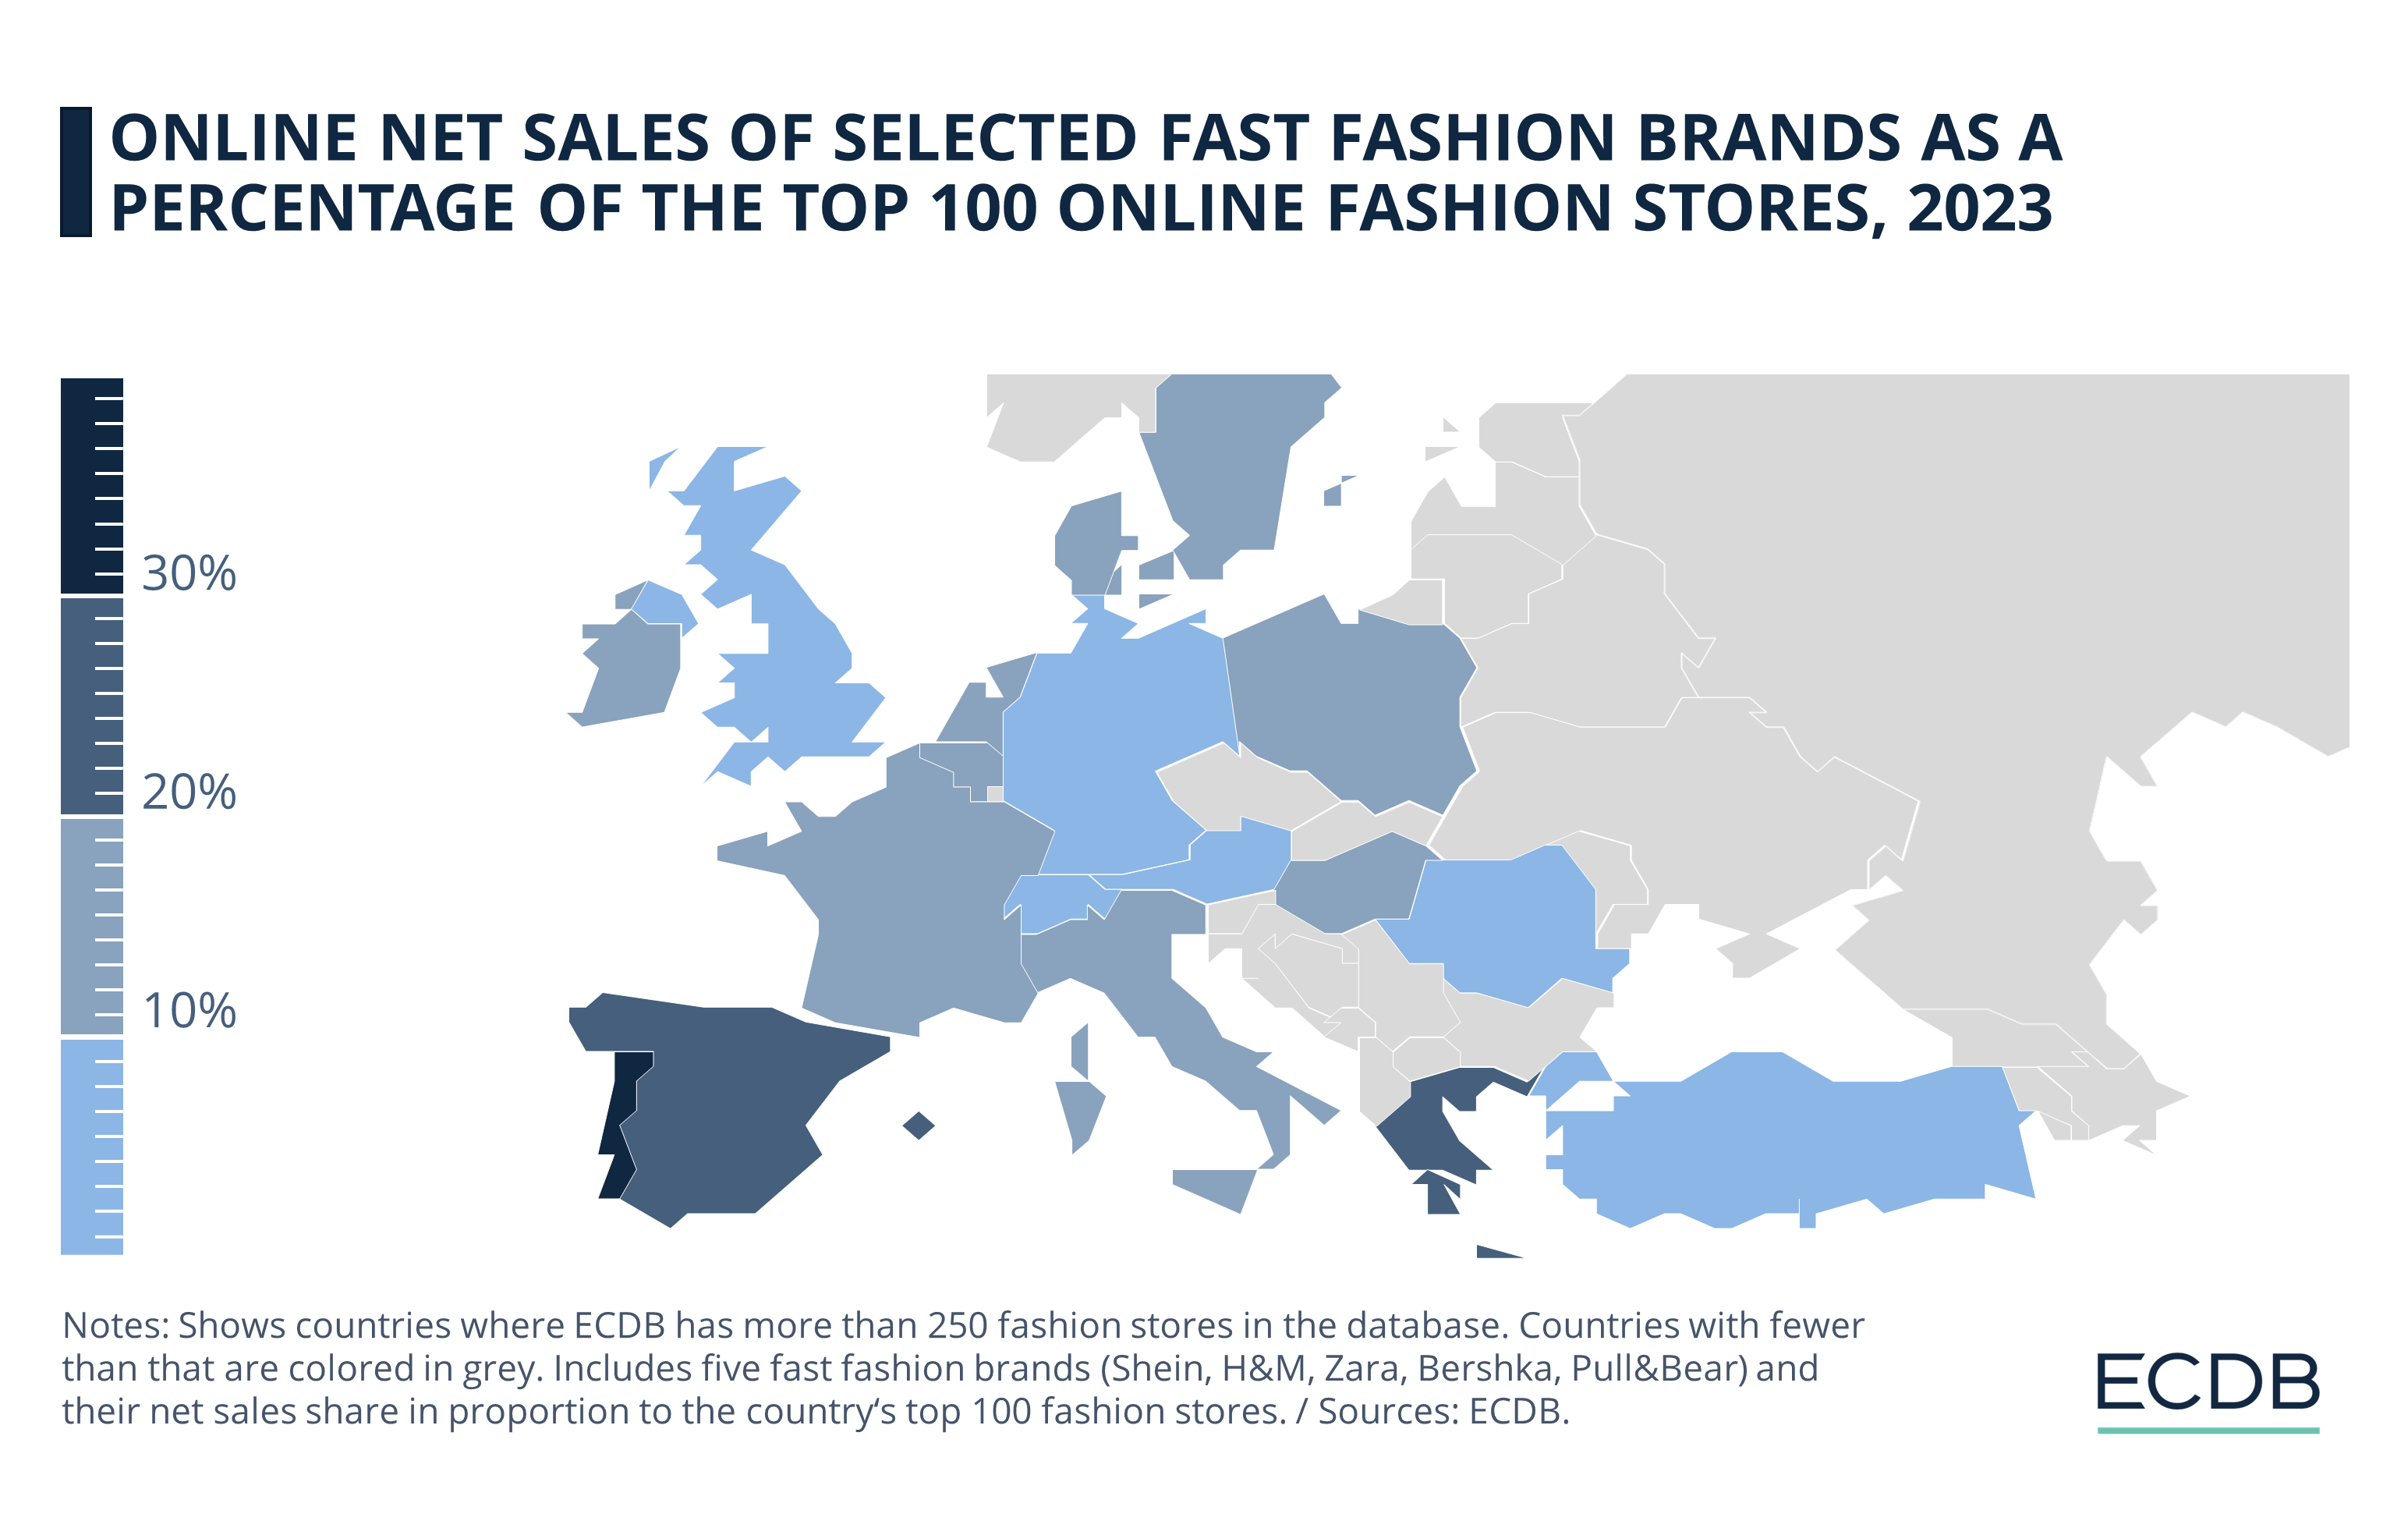 Online Net Sales of Selected Fast Fashion Brands as a Percentage of the Top 100 Online Fashion Stores, 2023